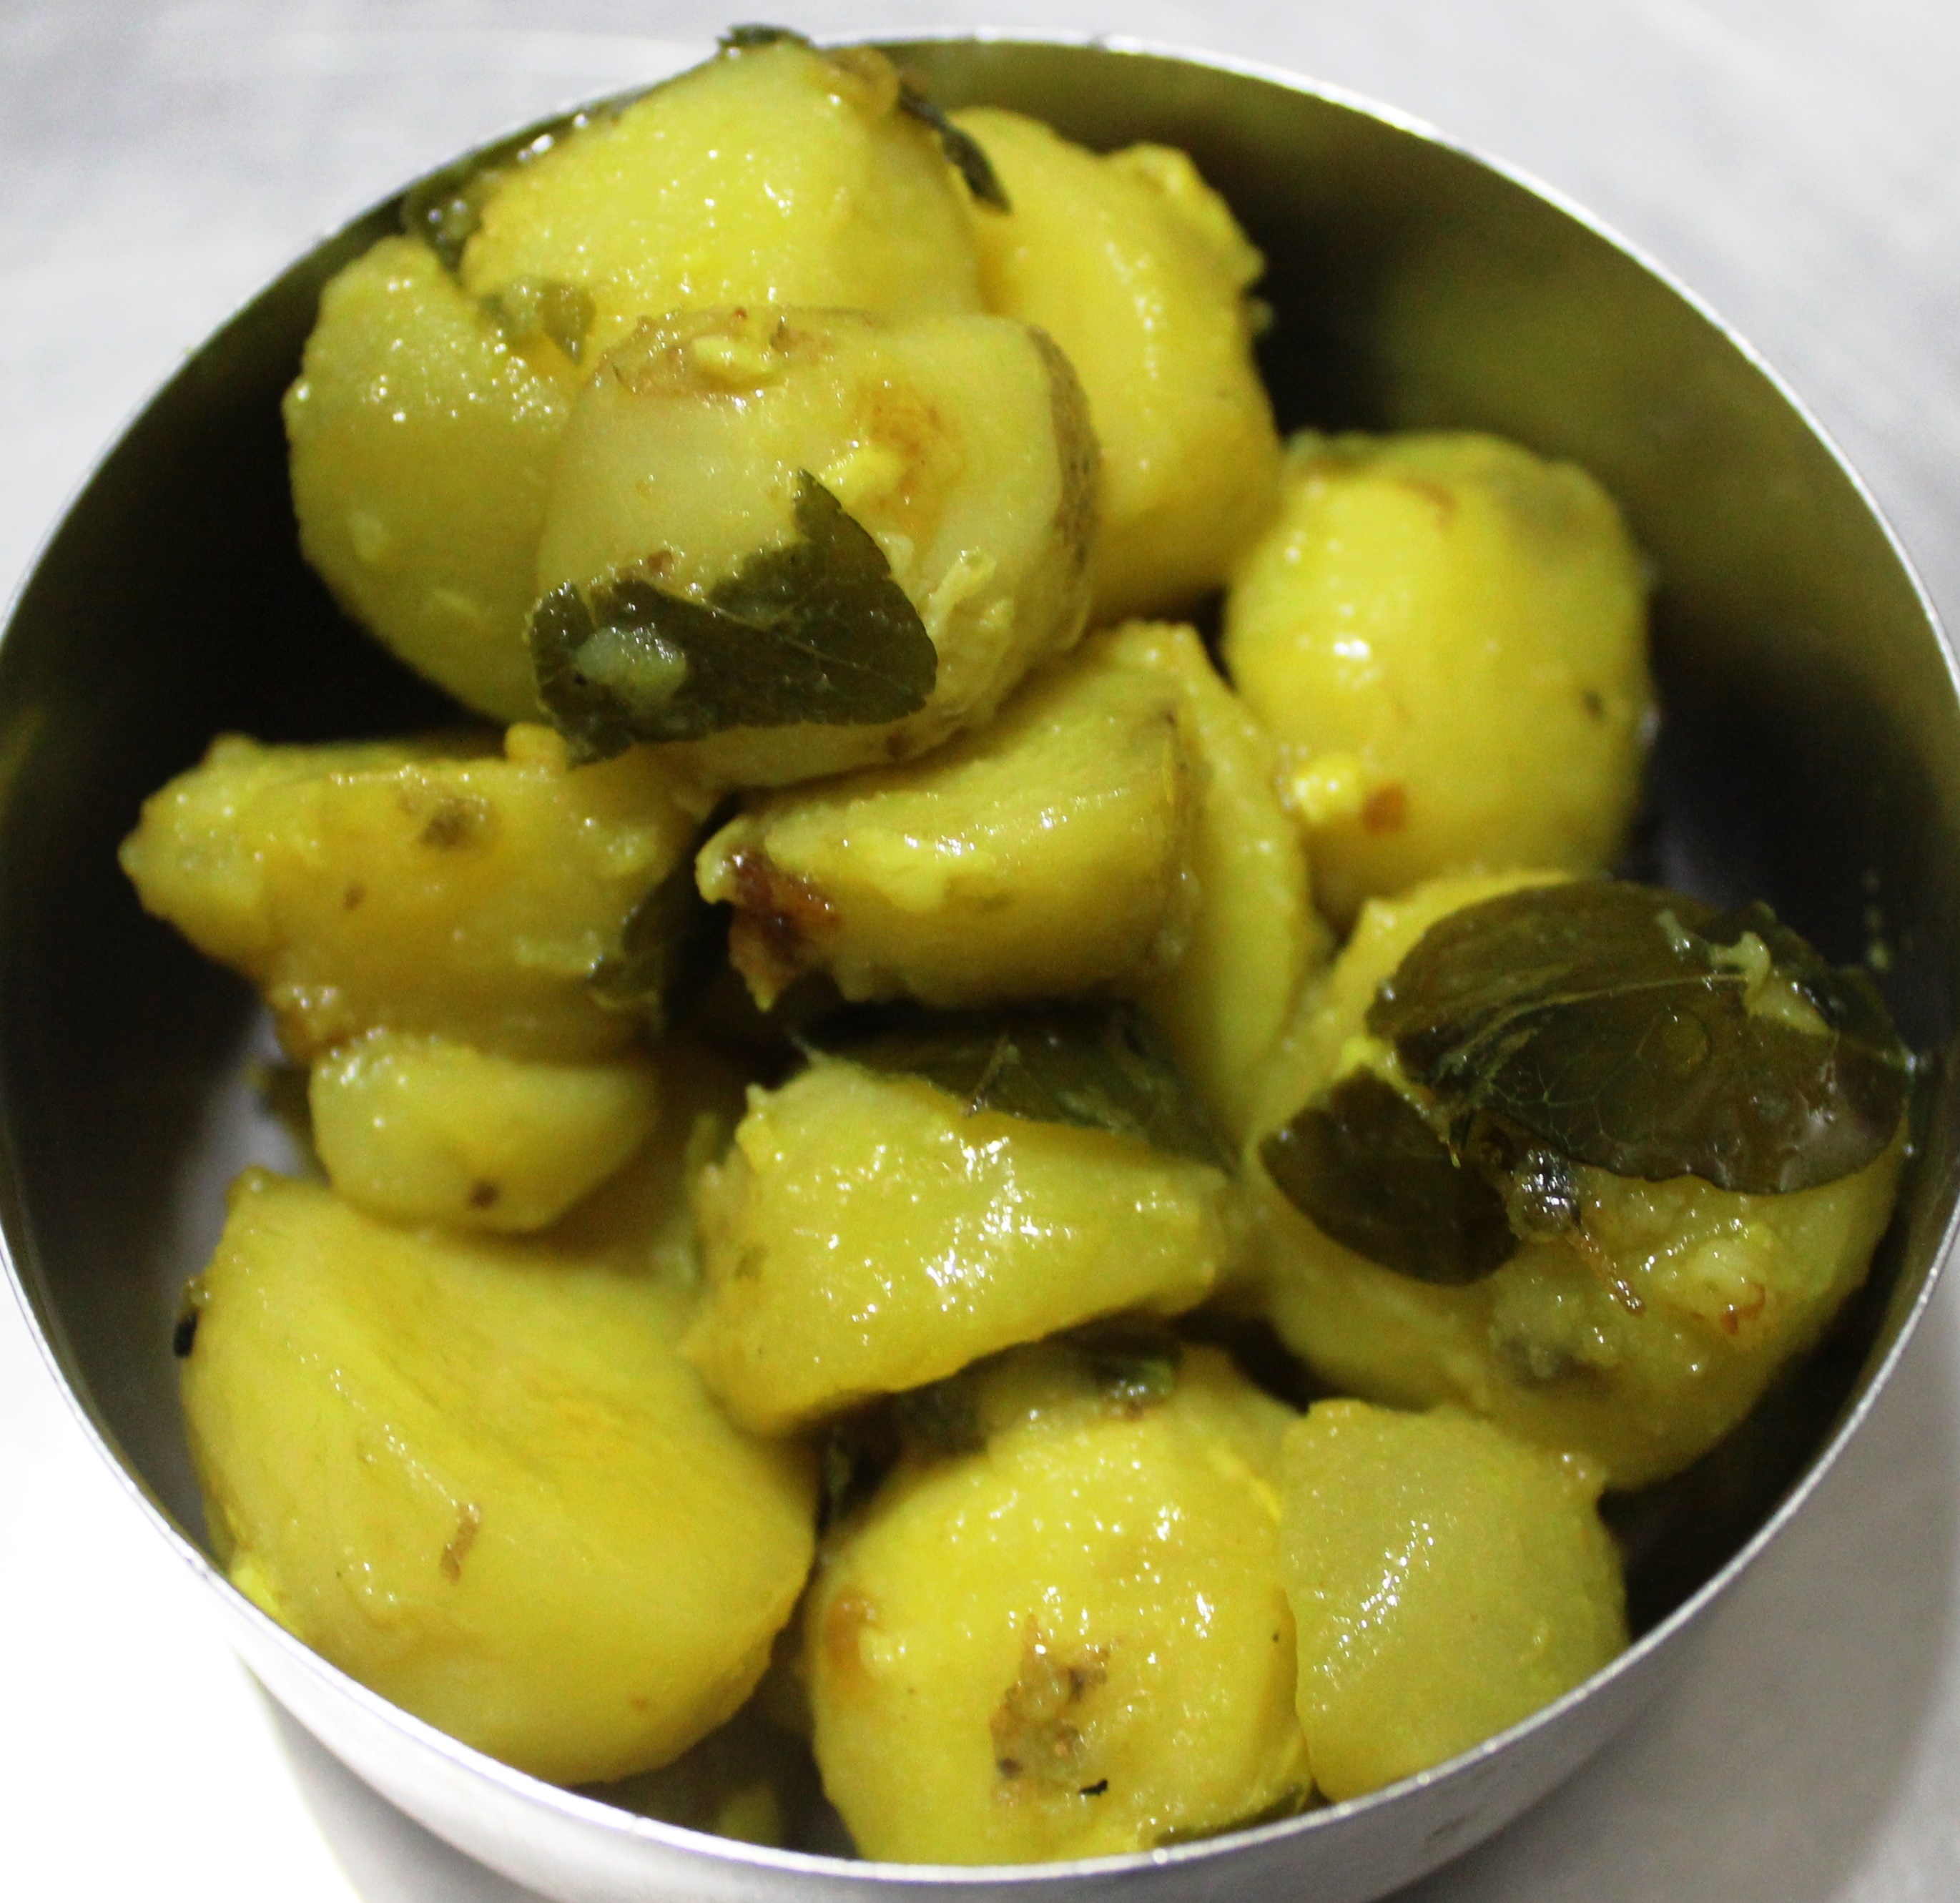 VEGETARIAN FOOD: The Recipe of Spicy Potatoes in the strong pungent flavour of garlic & green chillies in masalahealth.in